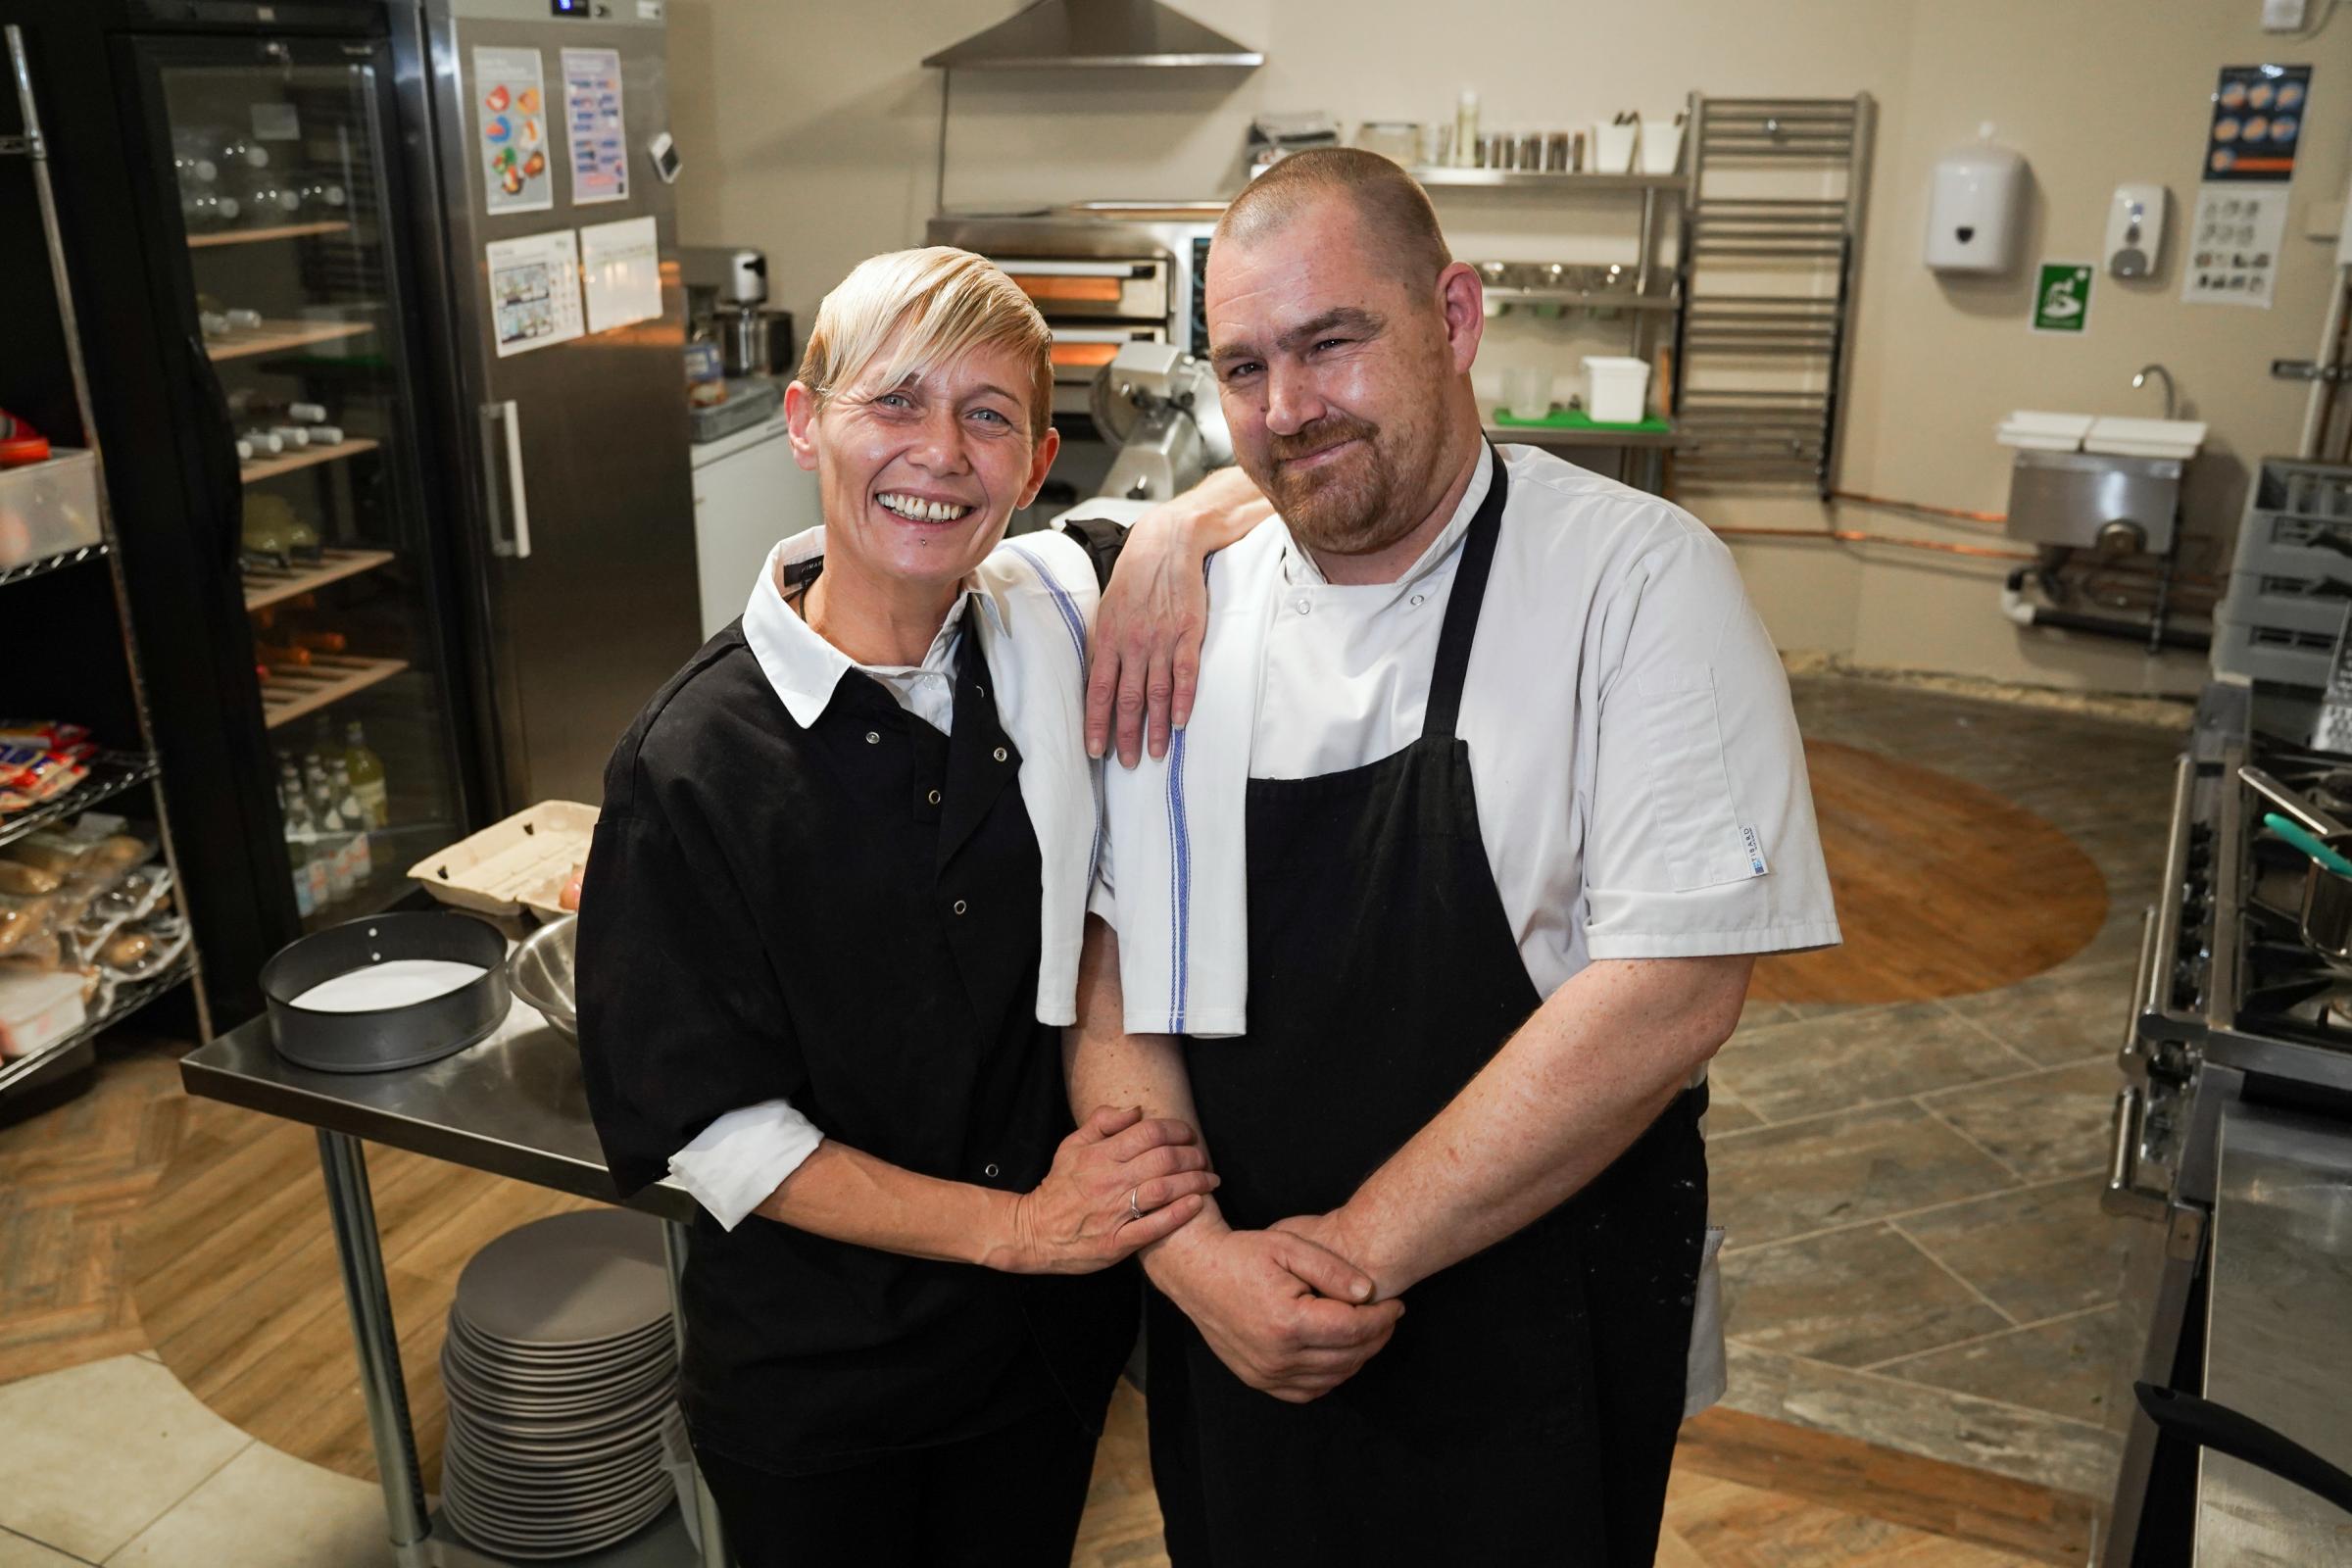 Meet the chefs of II Vigneto Authentic Italian Food and Drink, Sahra McGregor and Mikie ODare. Picture: Rob Davies